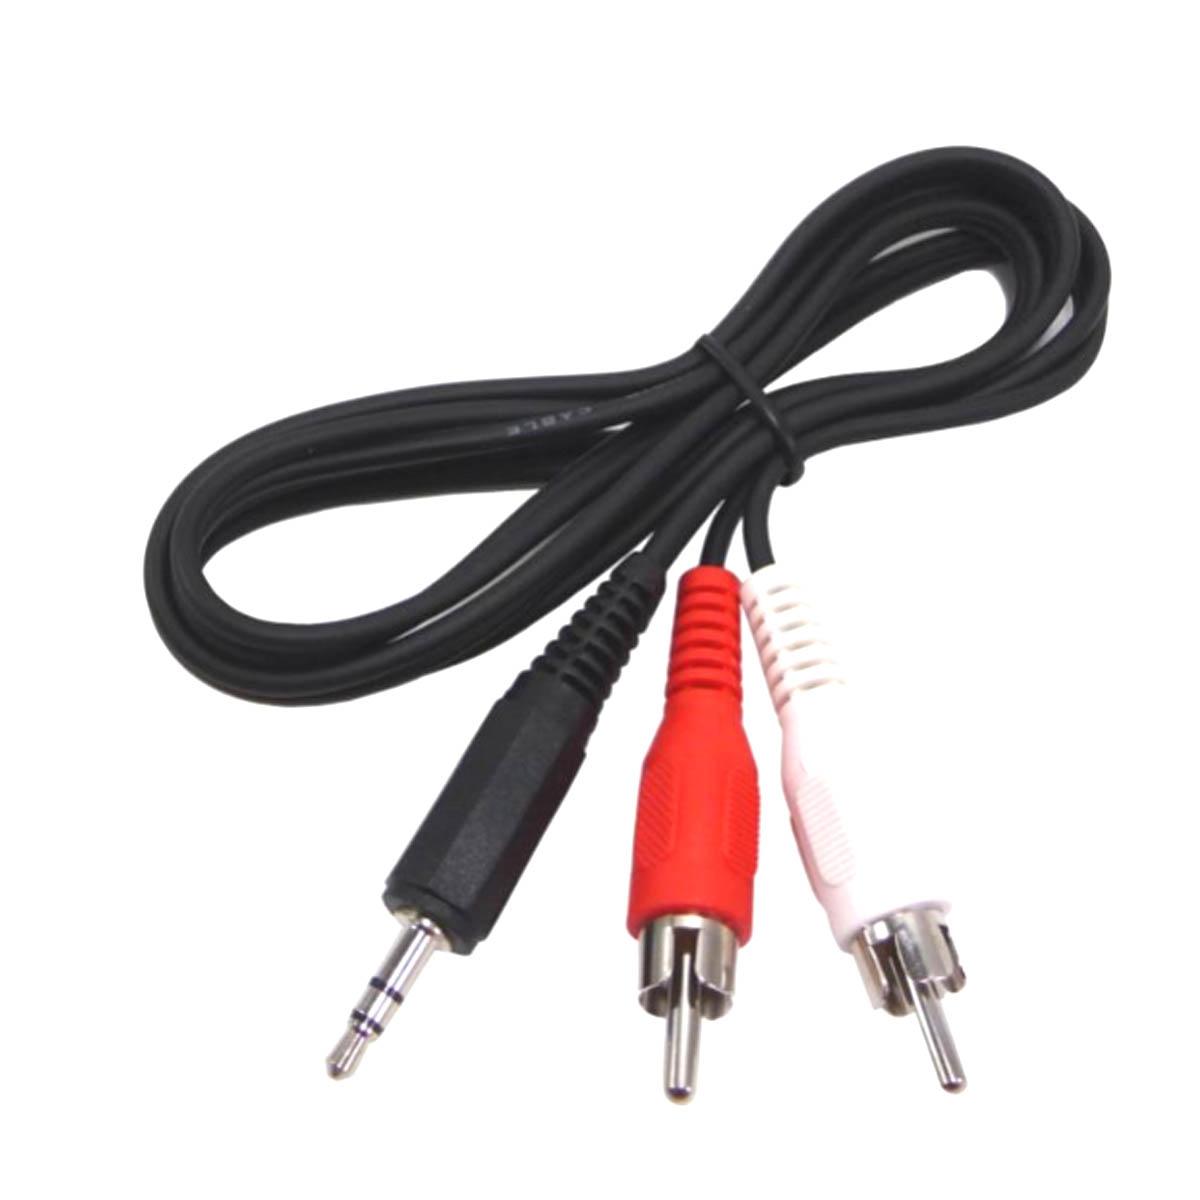 What Does An Audio Cable Do